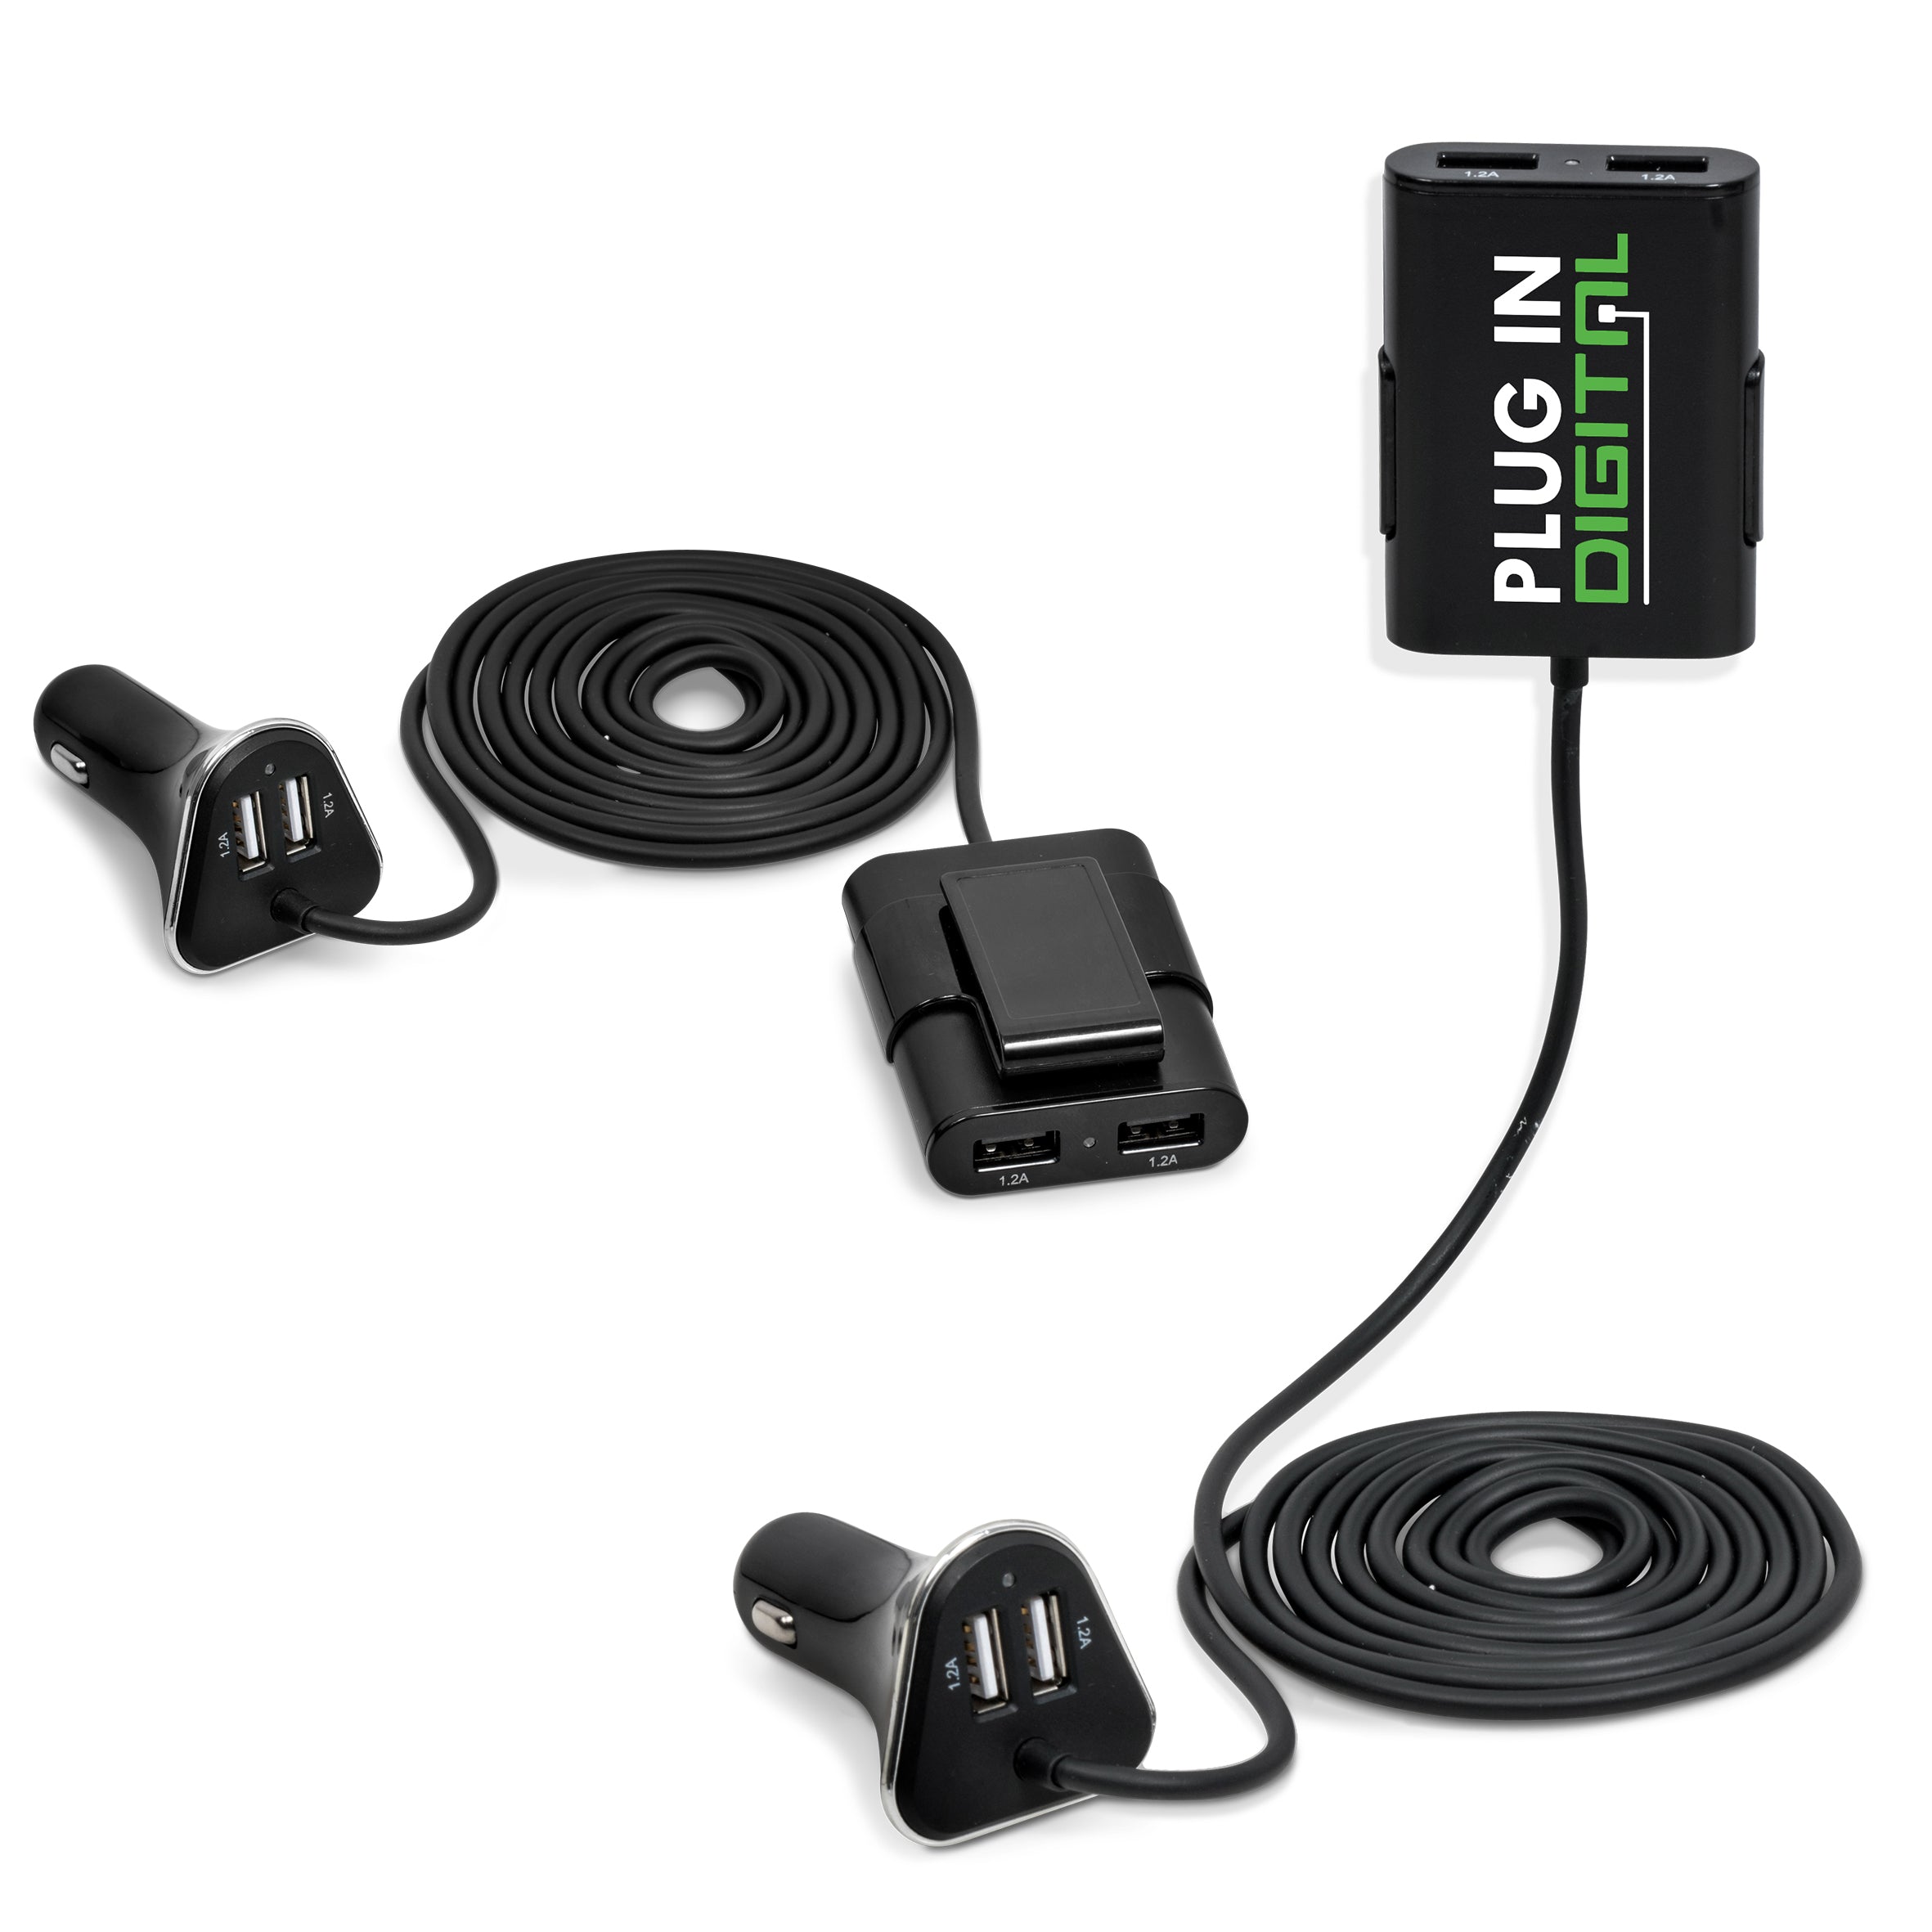 TravelSmart Multi-Charger Black / BL - Power Adapters & Chargers